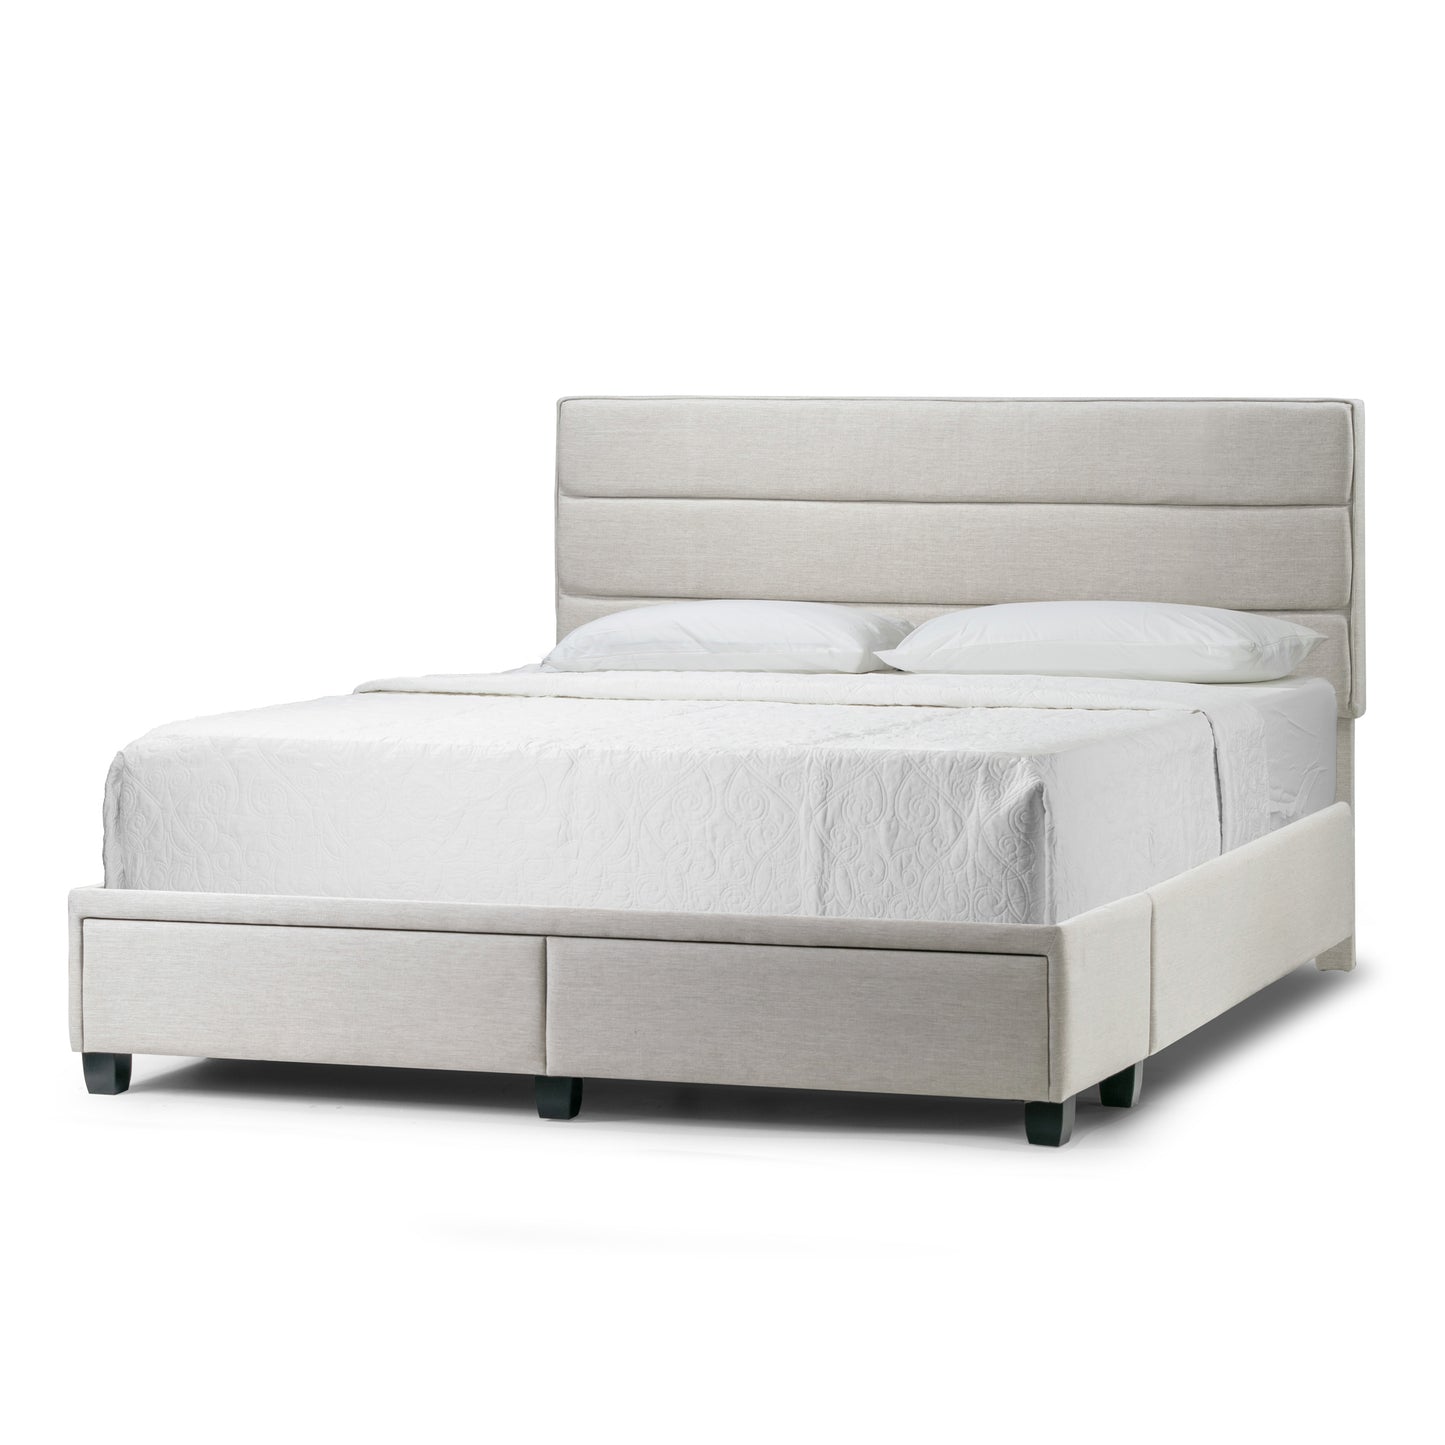 Arnia Beige Fabric King Bed Captain’s Bed with Two Storage Drawers